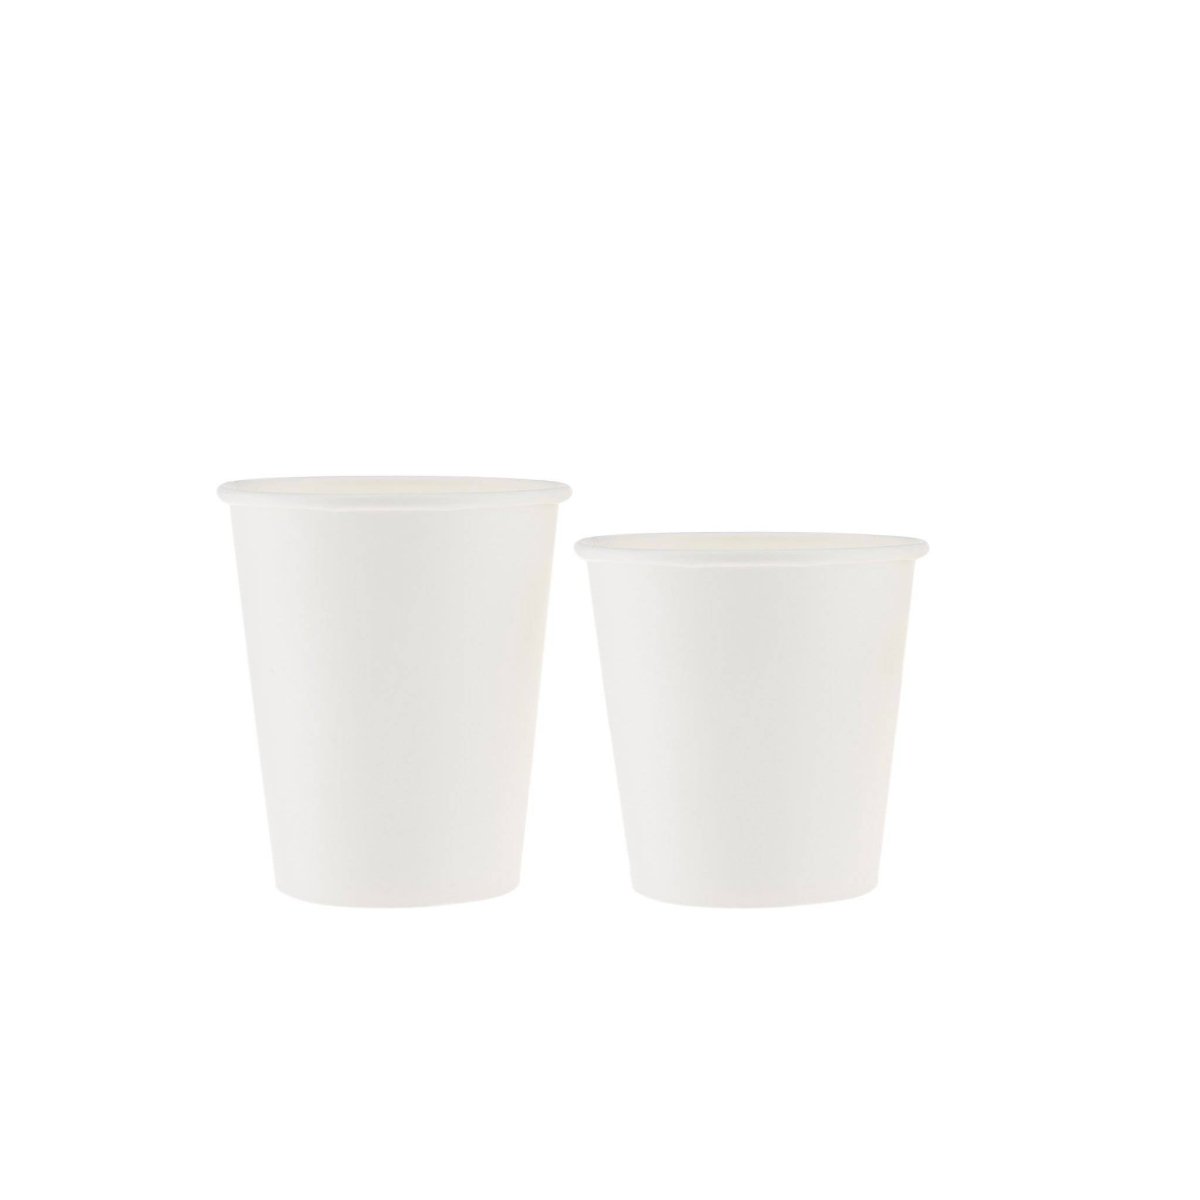 7oz single wall cups white (500 pieces) and 8oz single wall cups white (500 pieces) 28th Anniversary Combo - hotpackwebstore.com - Single Wall Paper Cups